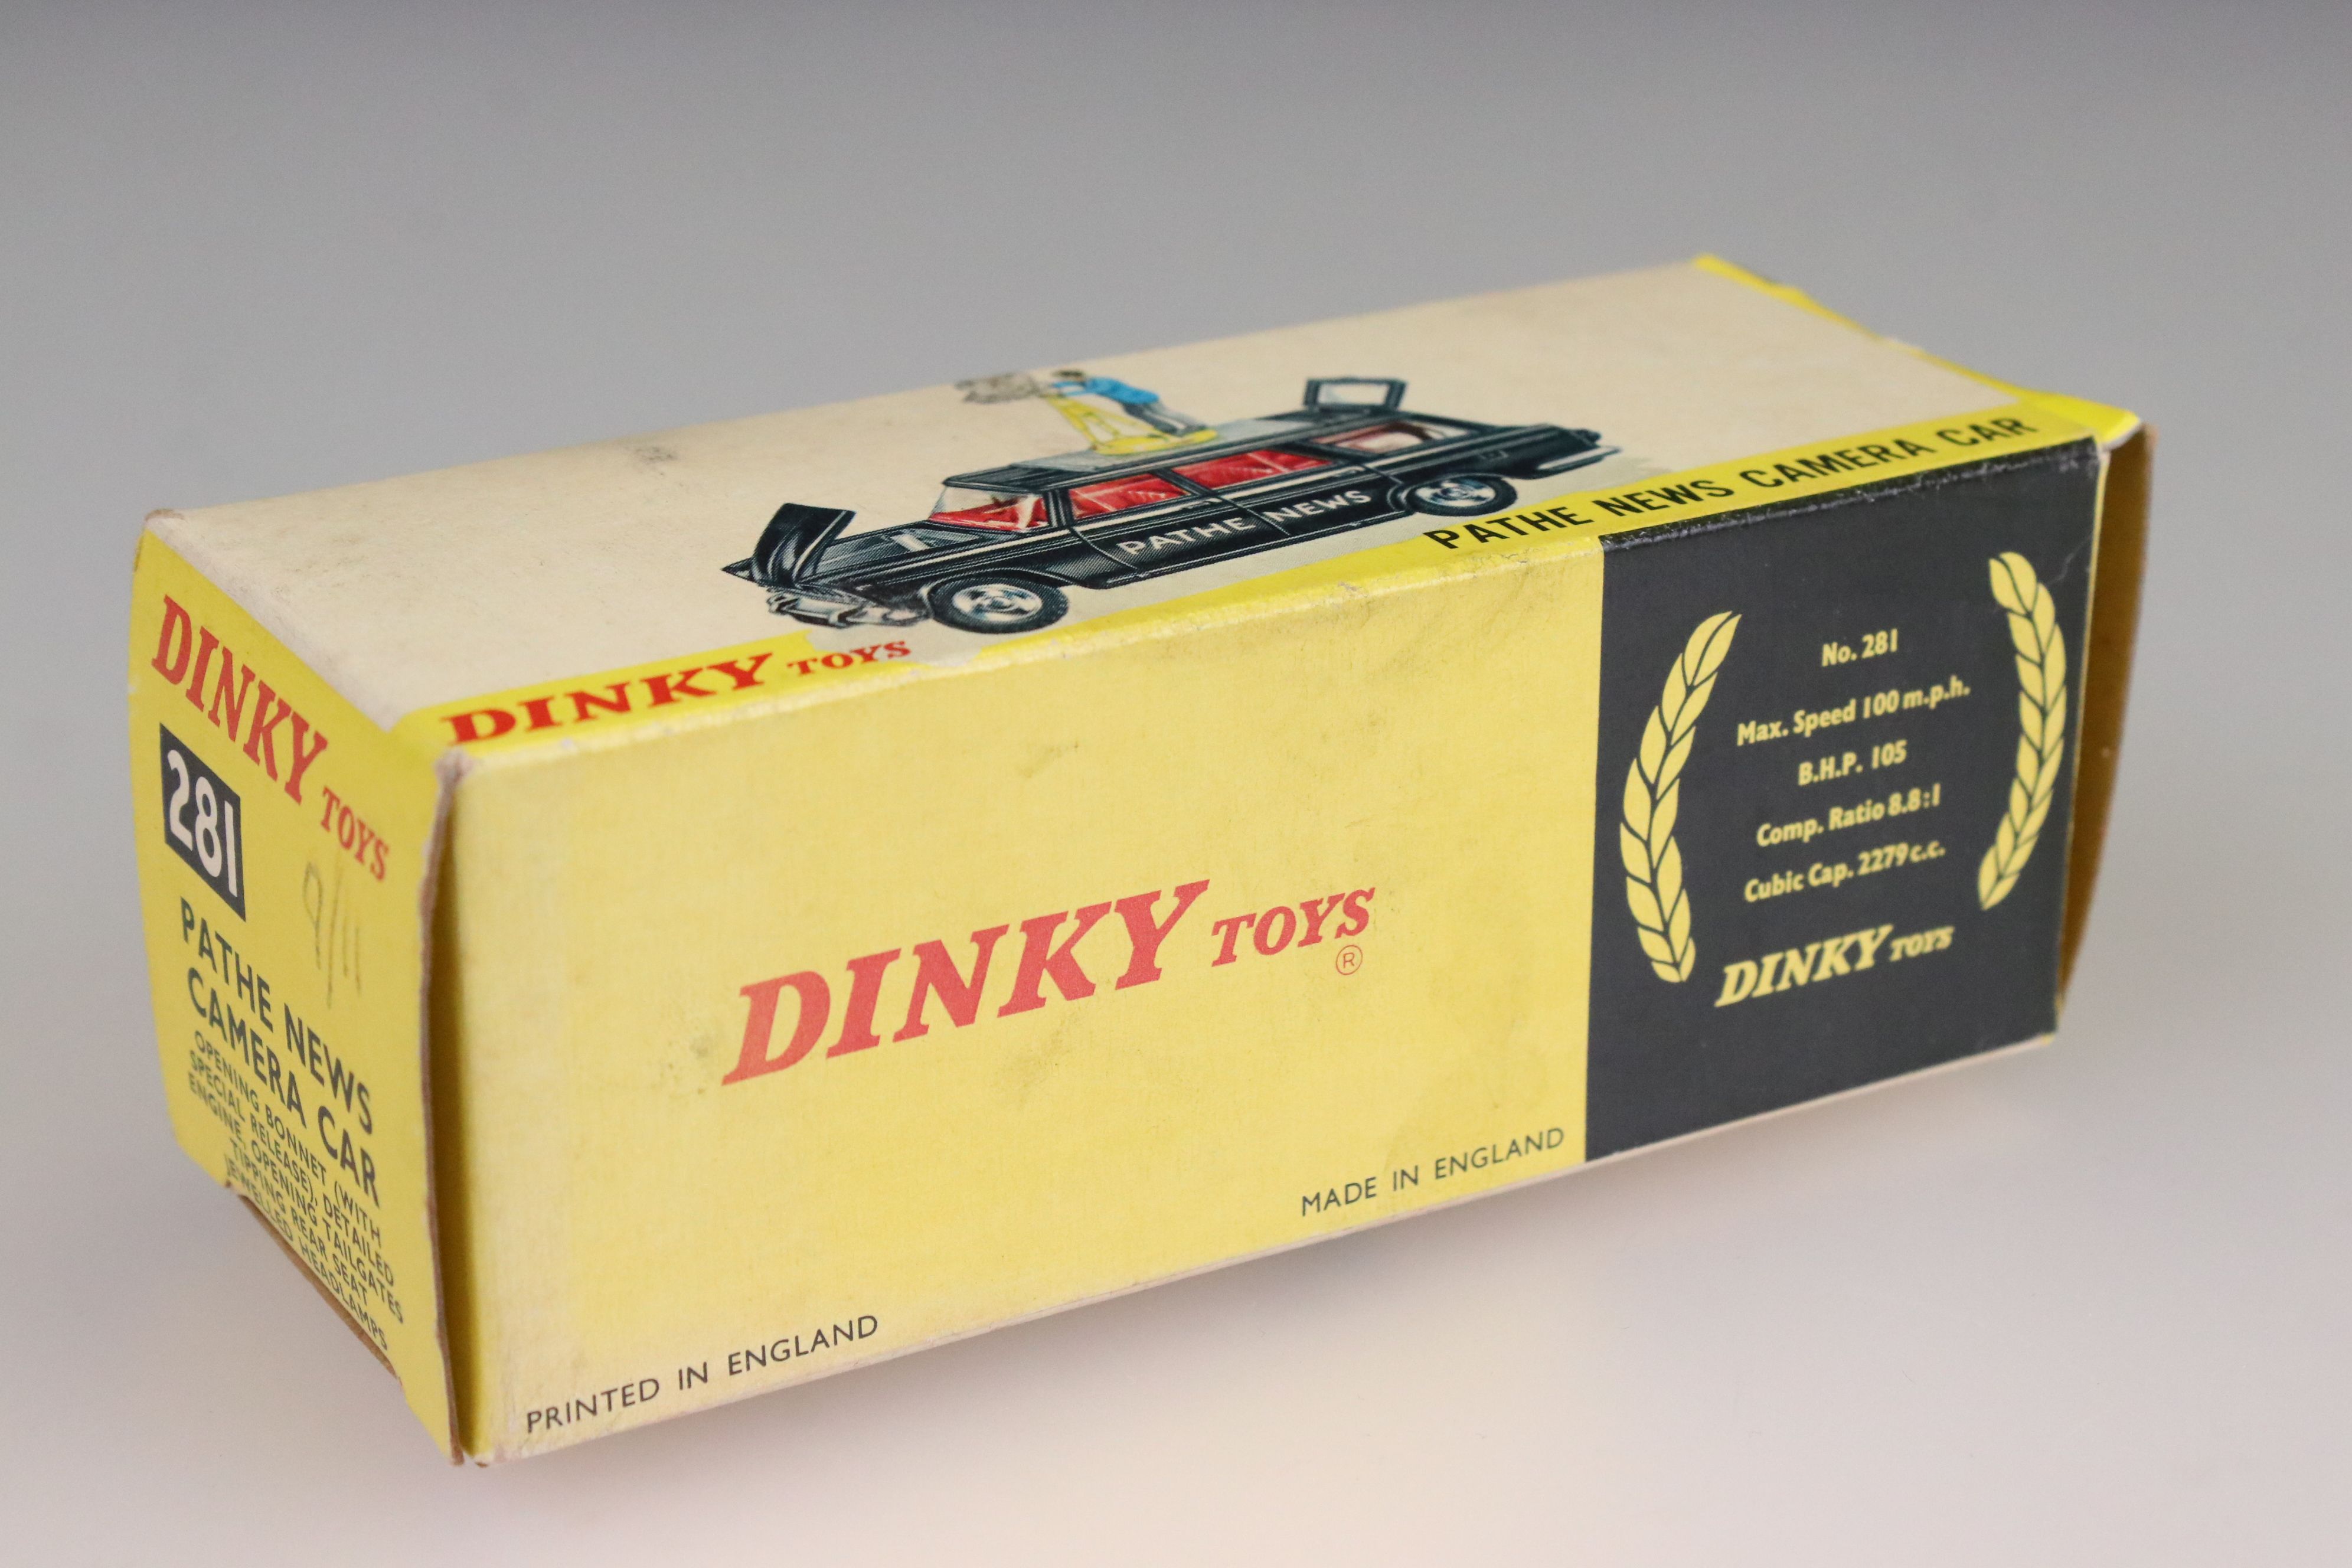 Boxed Dinky 281 Pathe News Camera Car diecast model complete with cameraman figure, diecast & decals - Image 9 of 12